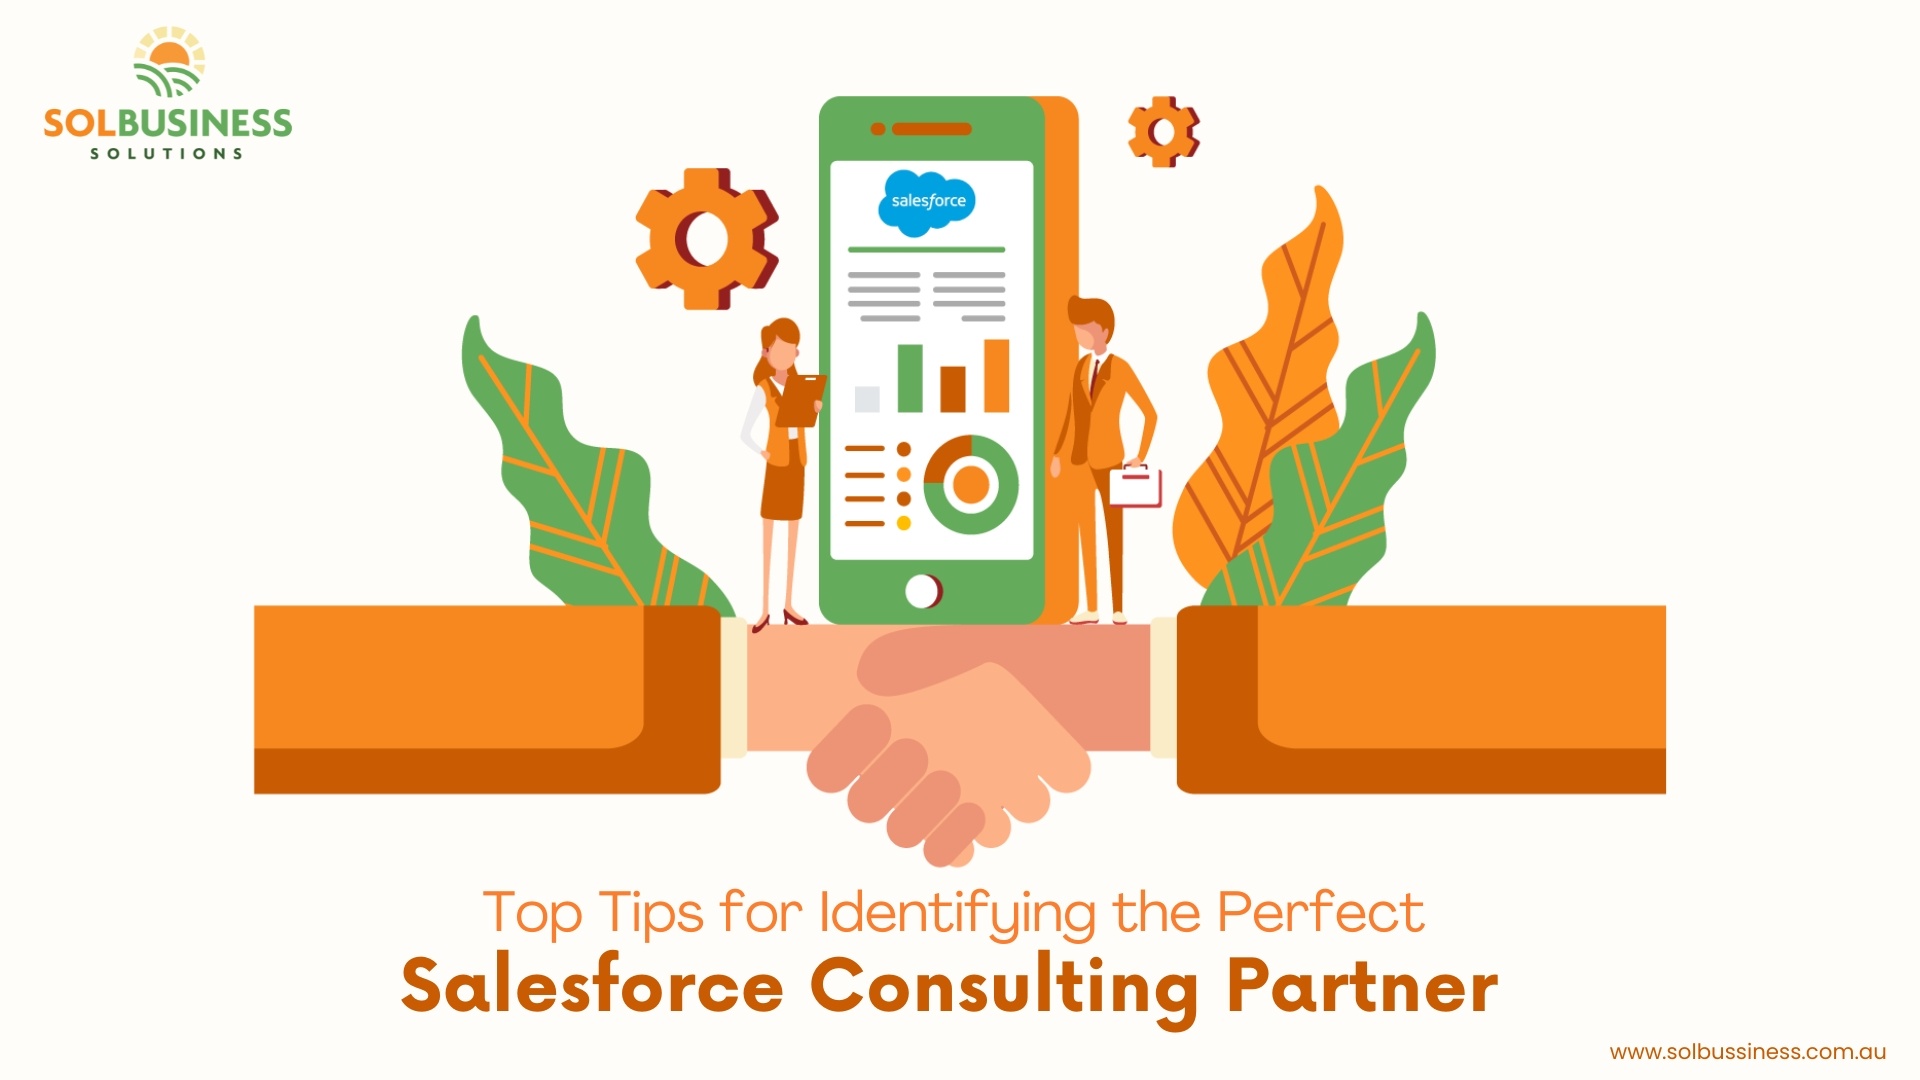 How Can You Find the Best Salesforce Consulting Partner? Top Strategies